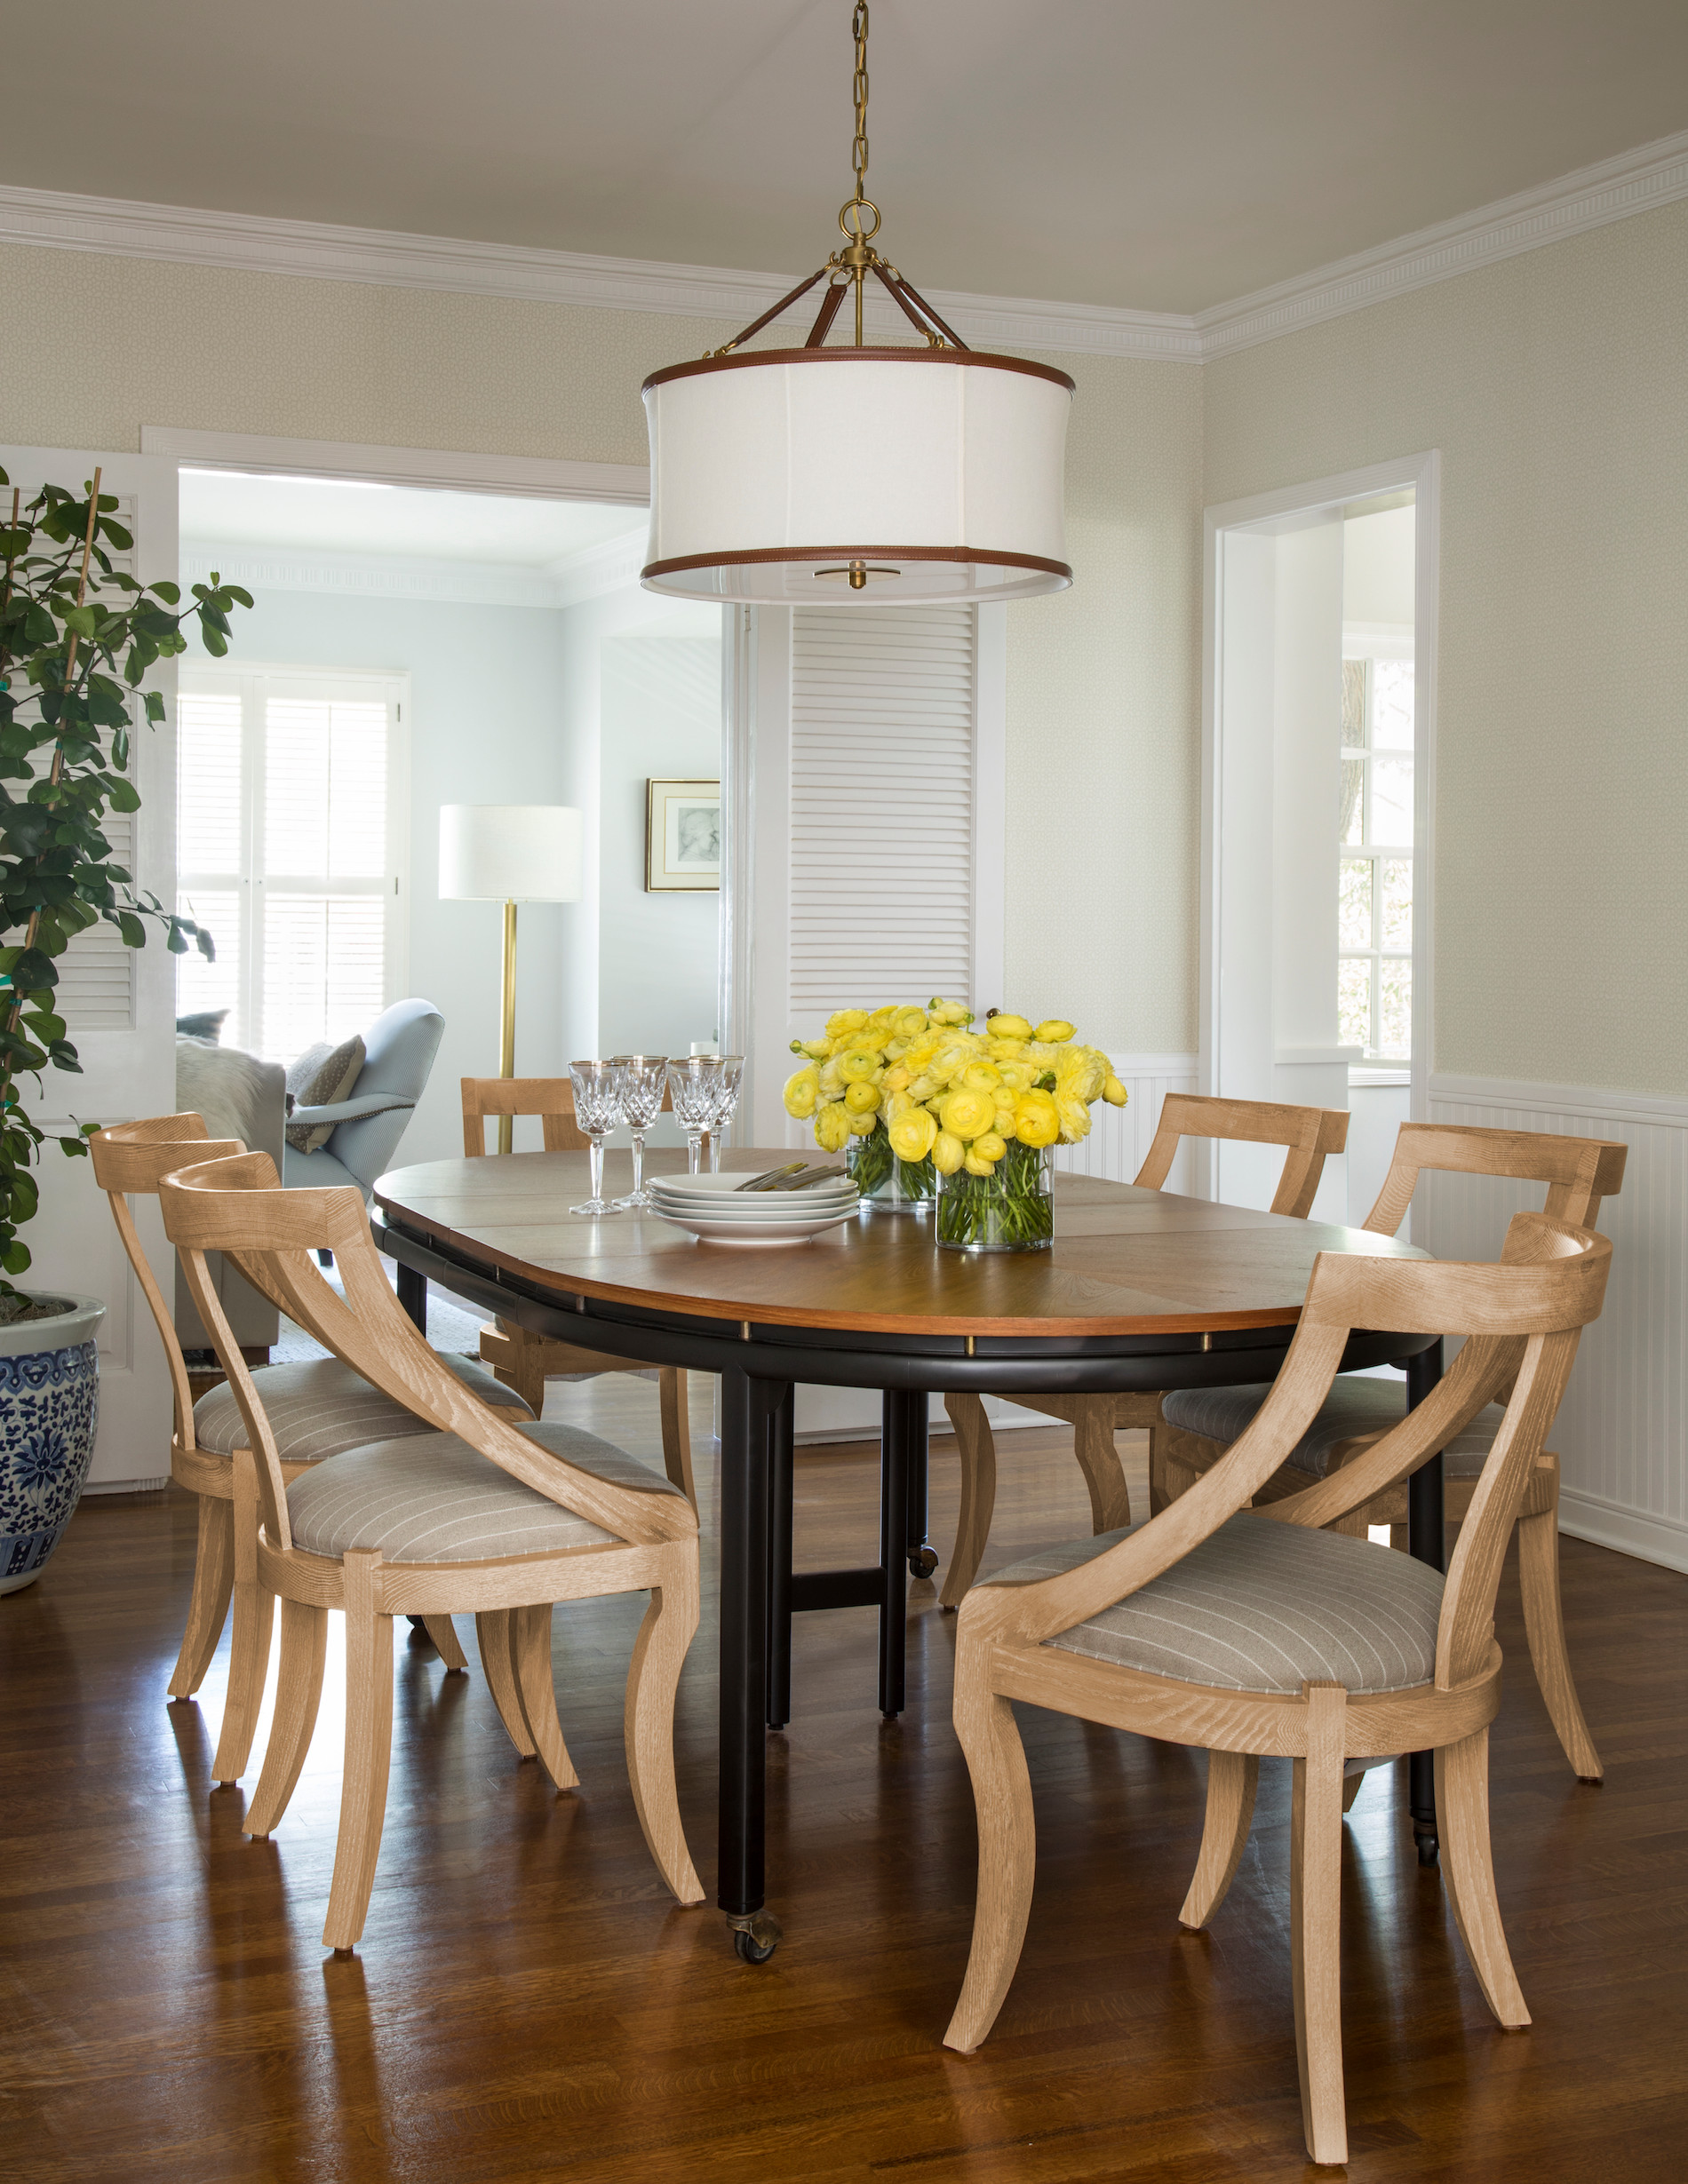 75 Dining Room Ideas You'll Love - October, 2023 | Houzz